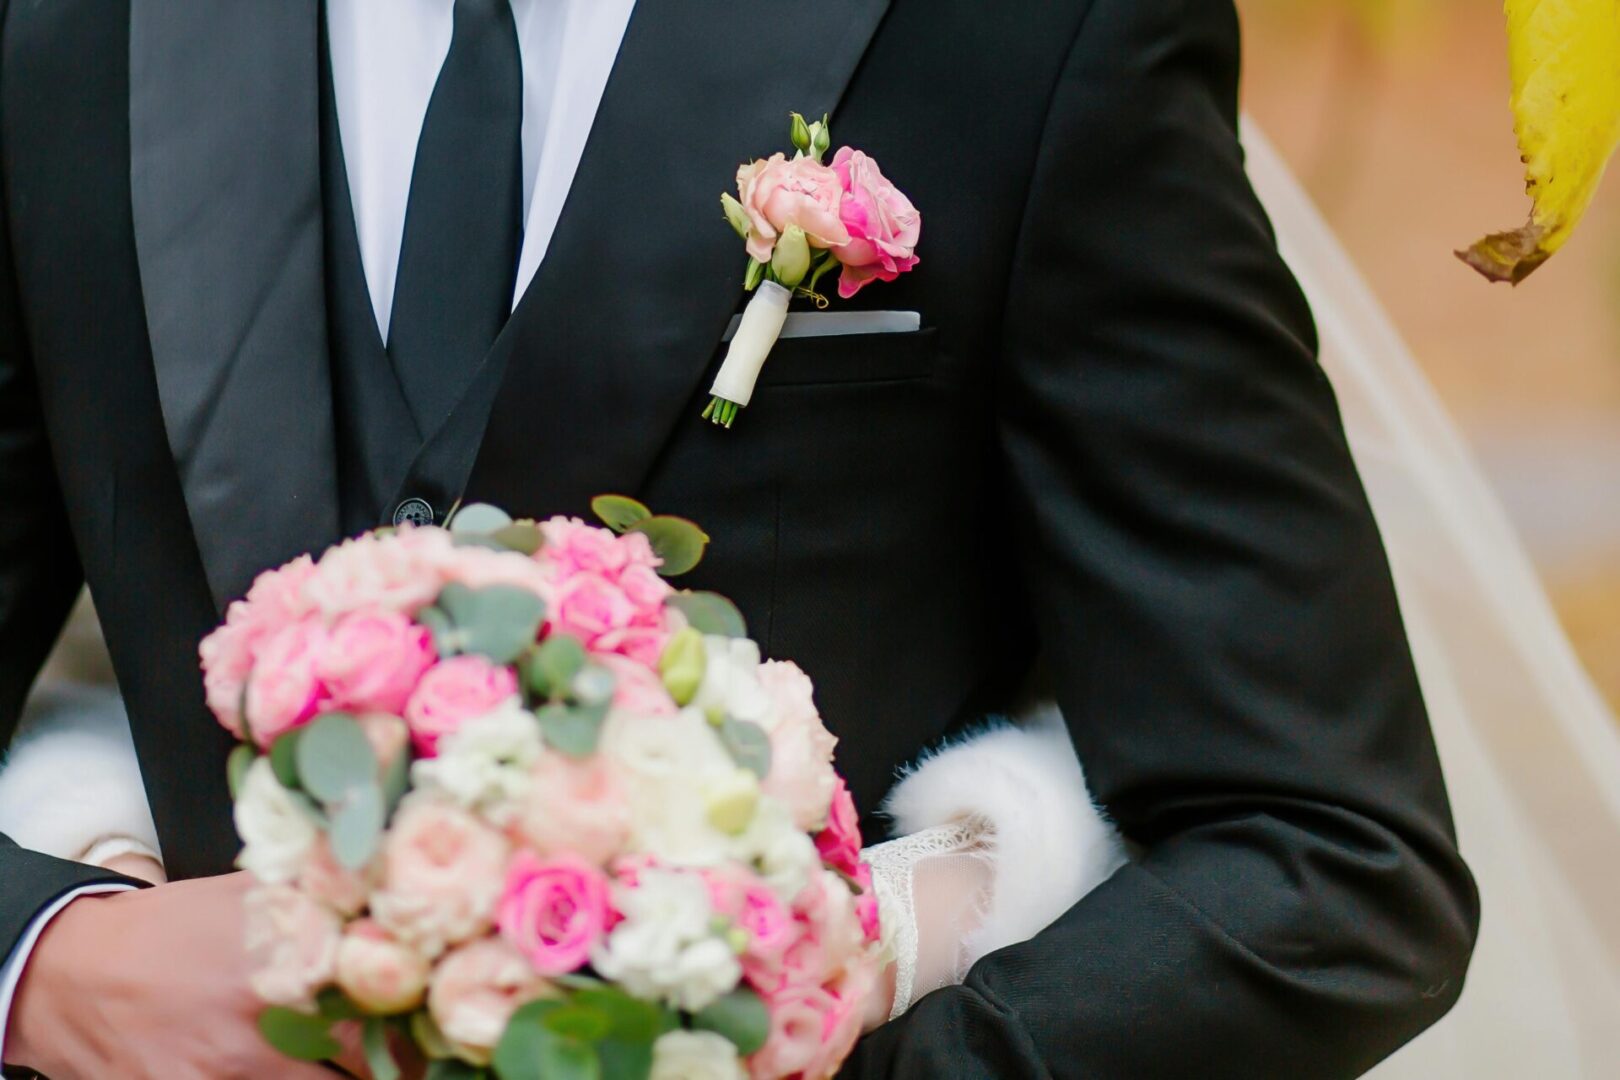 A man in suit and tie holding flowers.